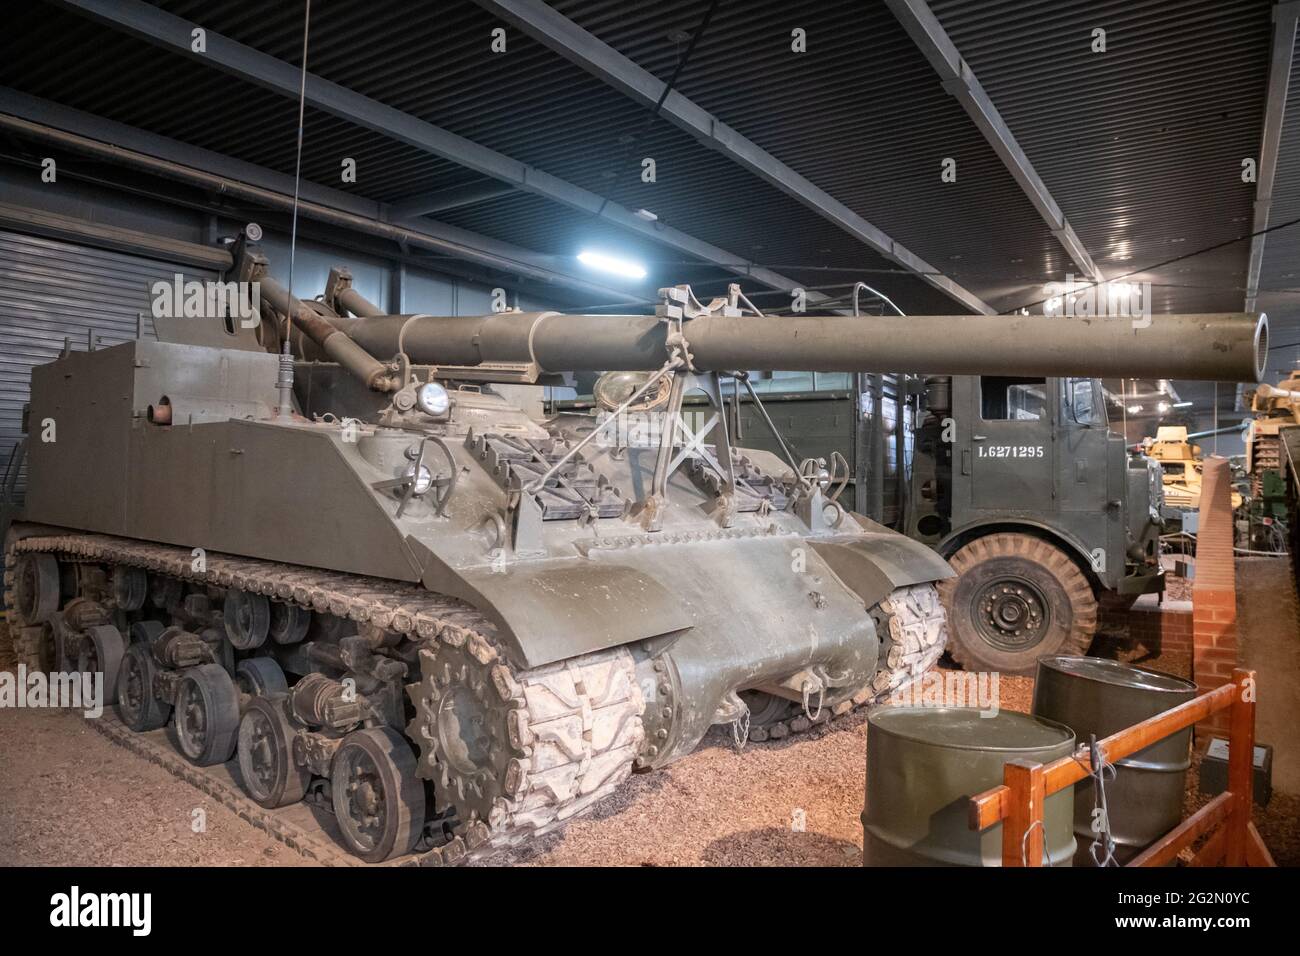 Duxford England May 2021 M40/43 american self propelled artillery from the vietnam war Stock Photo